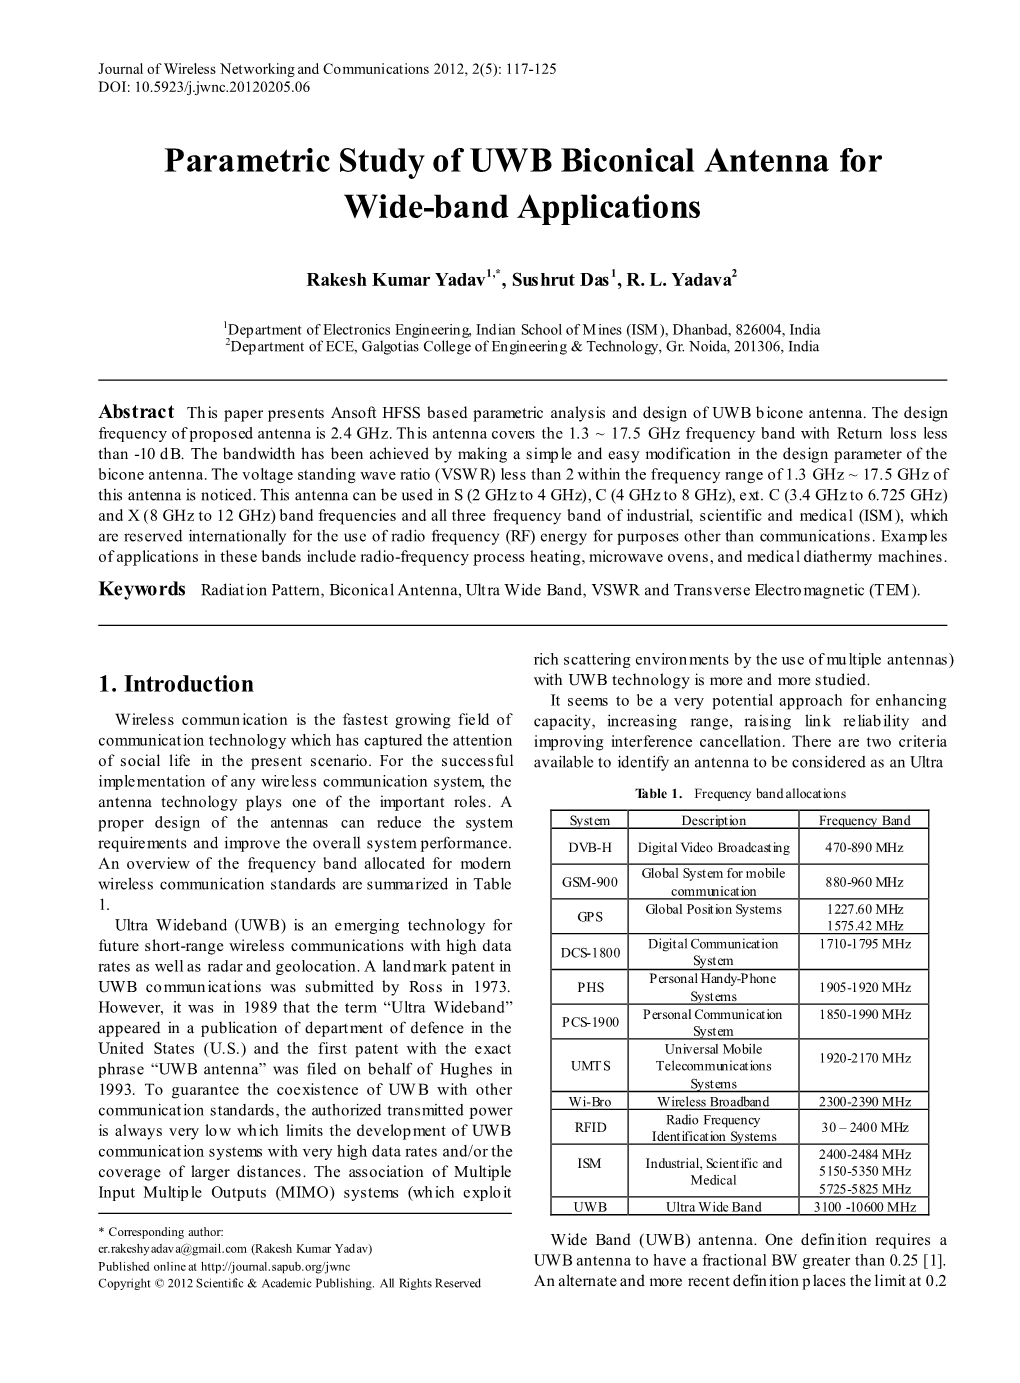 Parametric Study of UWB Biconical Antenna for Wide-Band Applications